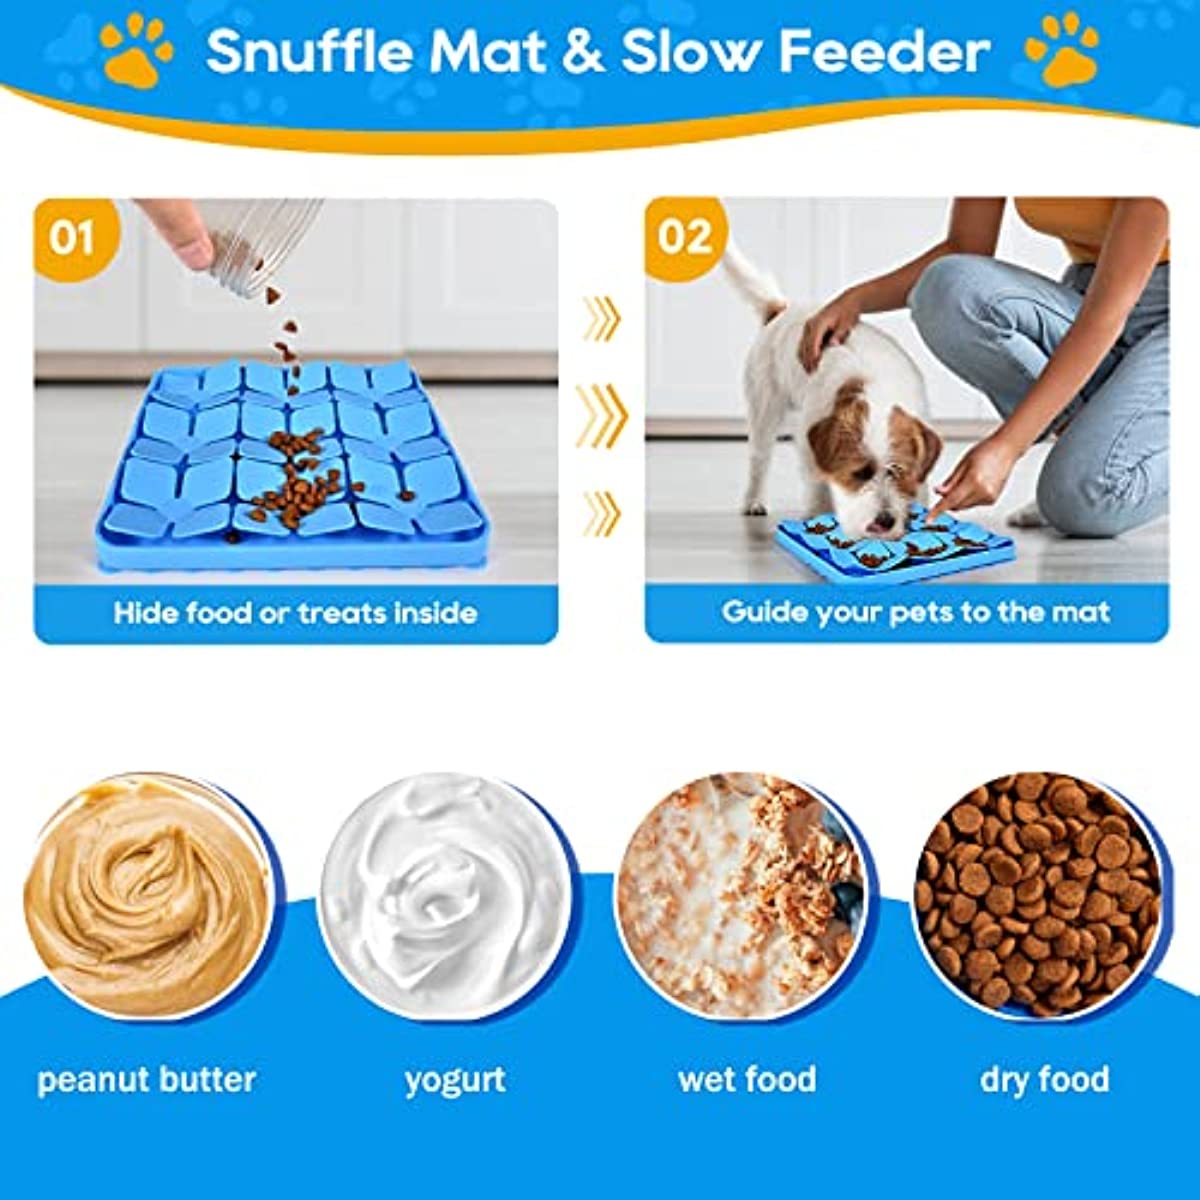 Guide to Snuffle Mats For Dogs & Puppies: Benefits, How to Use, Cleaning  and More